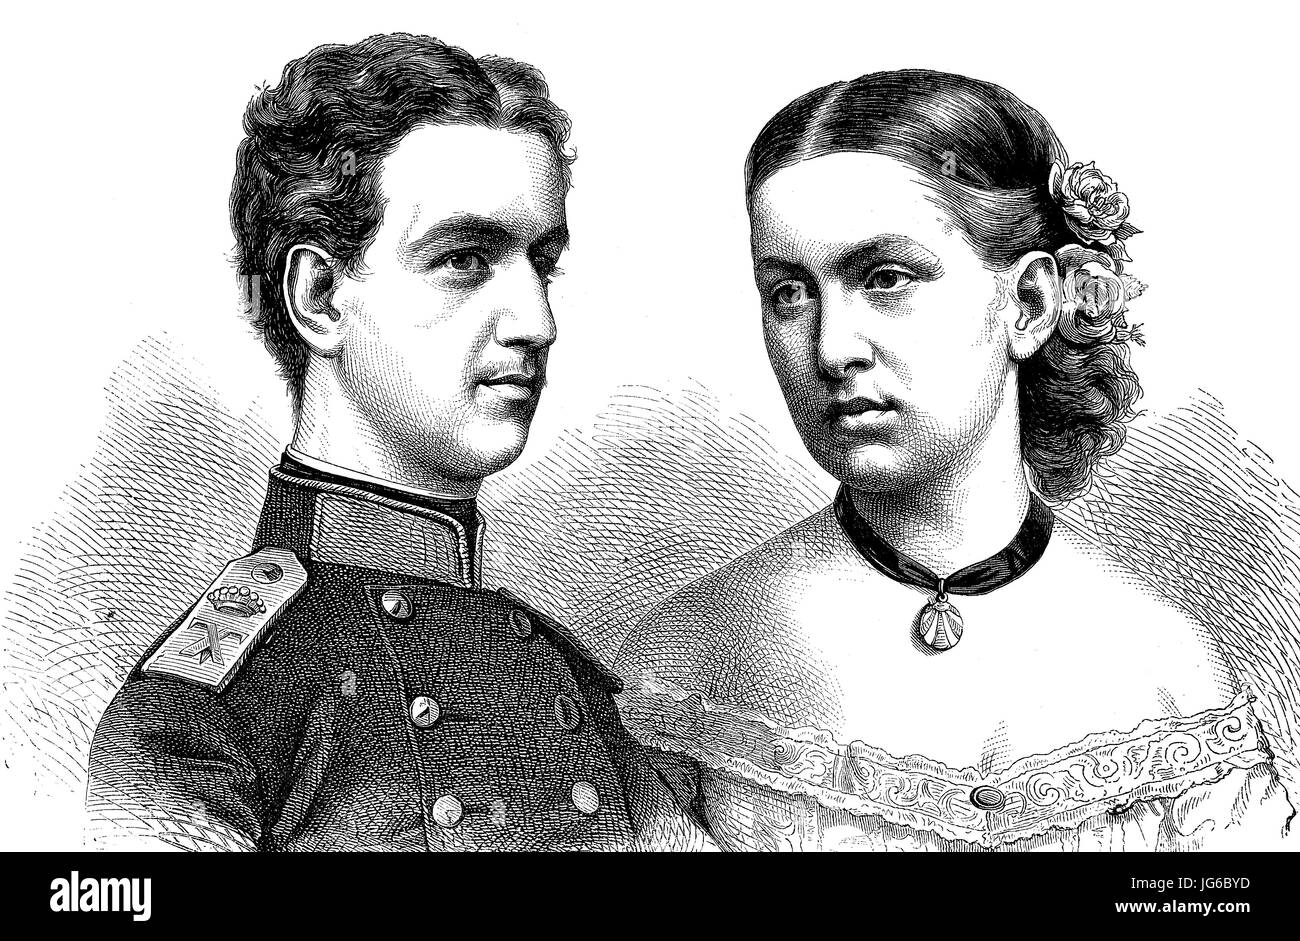 Digital improved:, George I of Greece and his wife Grand Duchess Olga Constantinovna of Russia , illustration from the 19th century Stock Photo